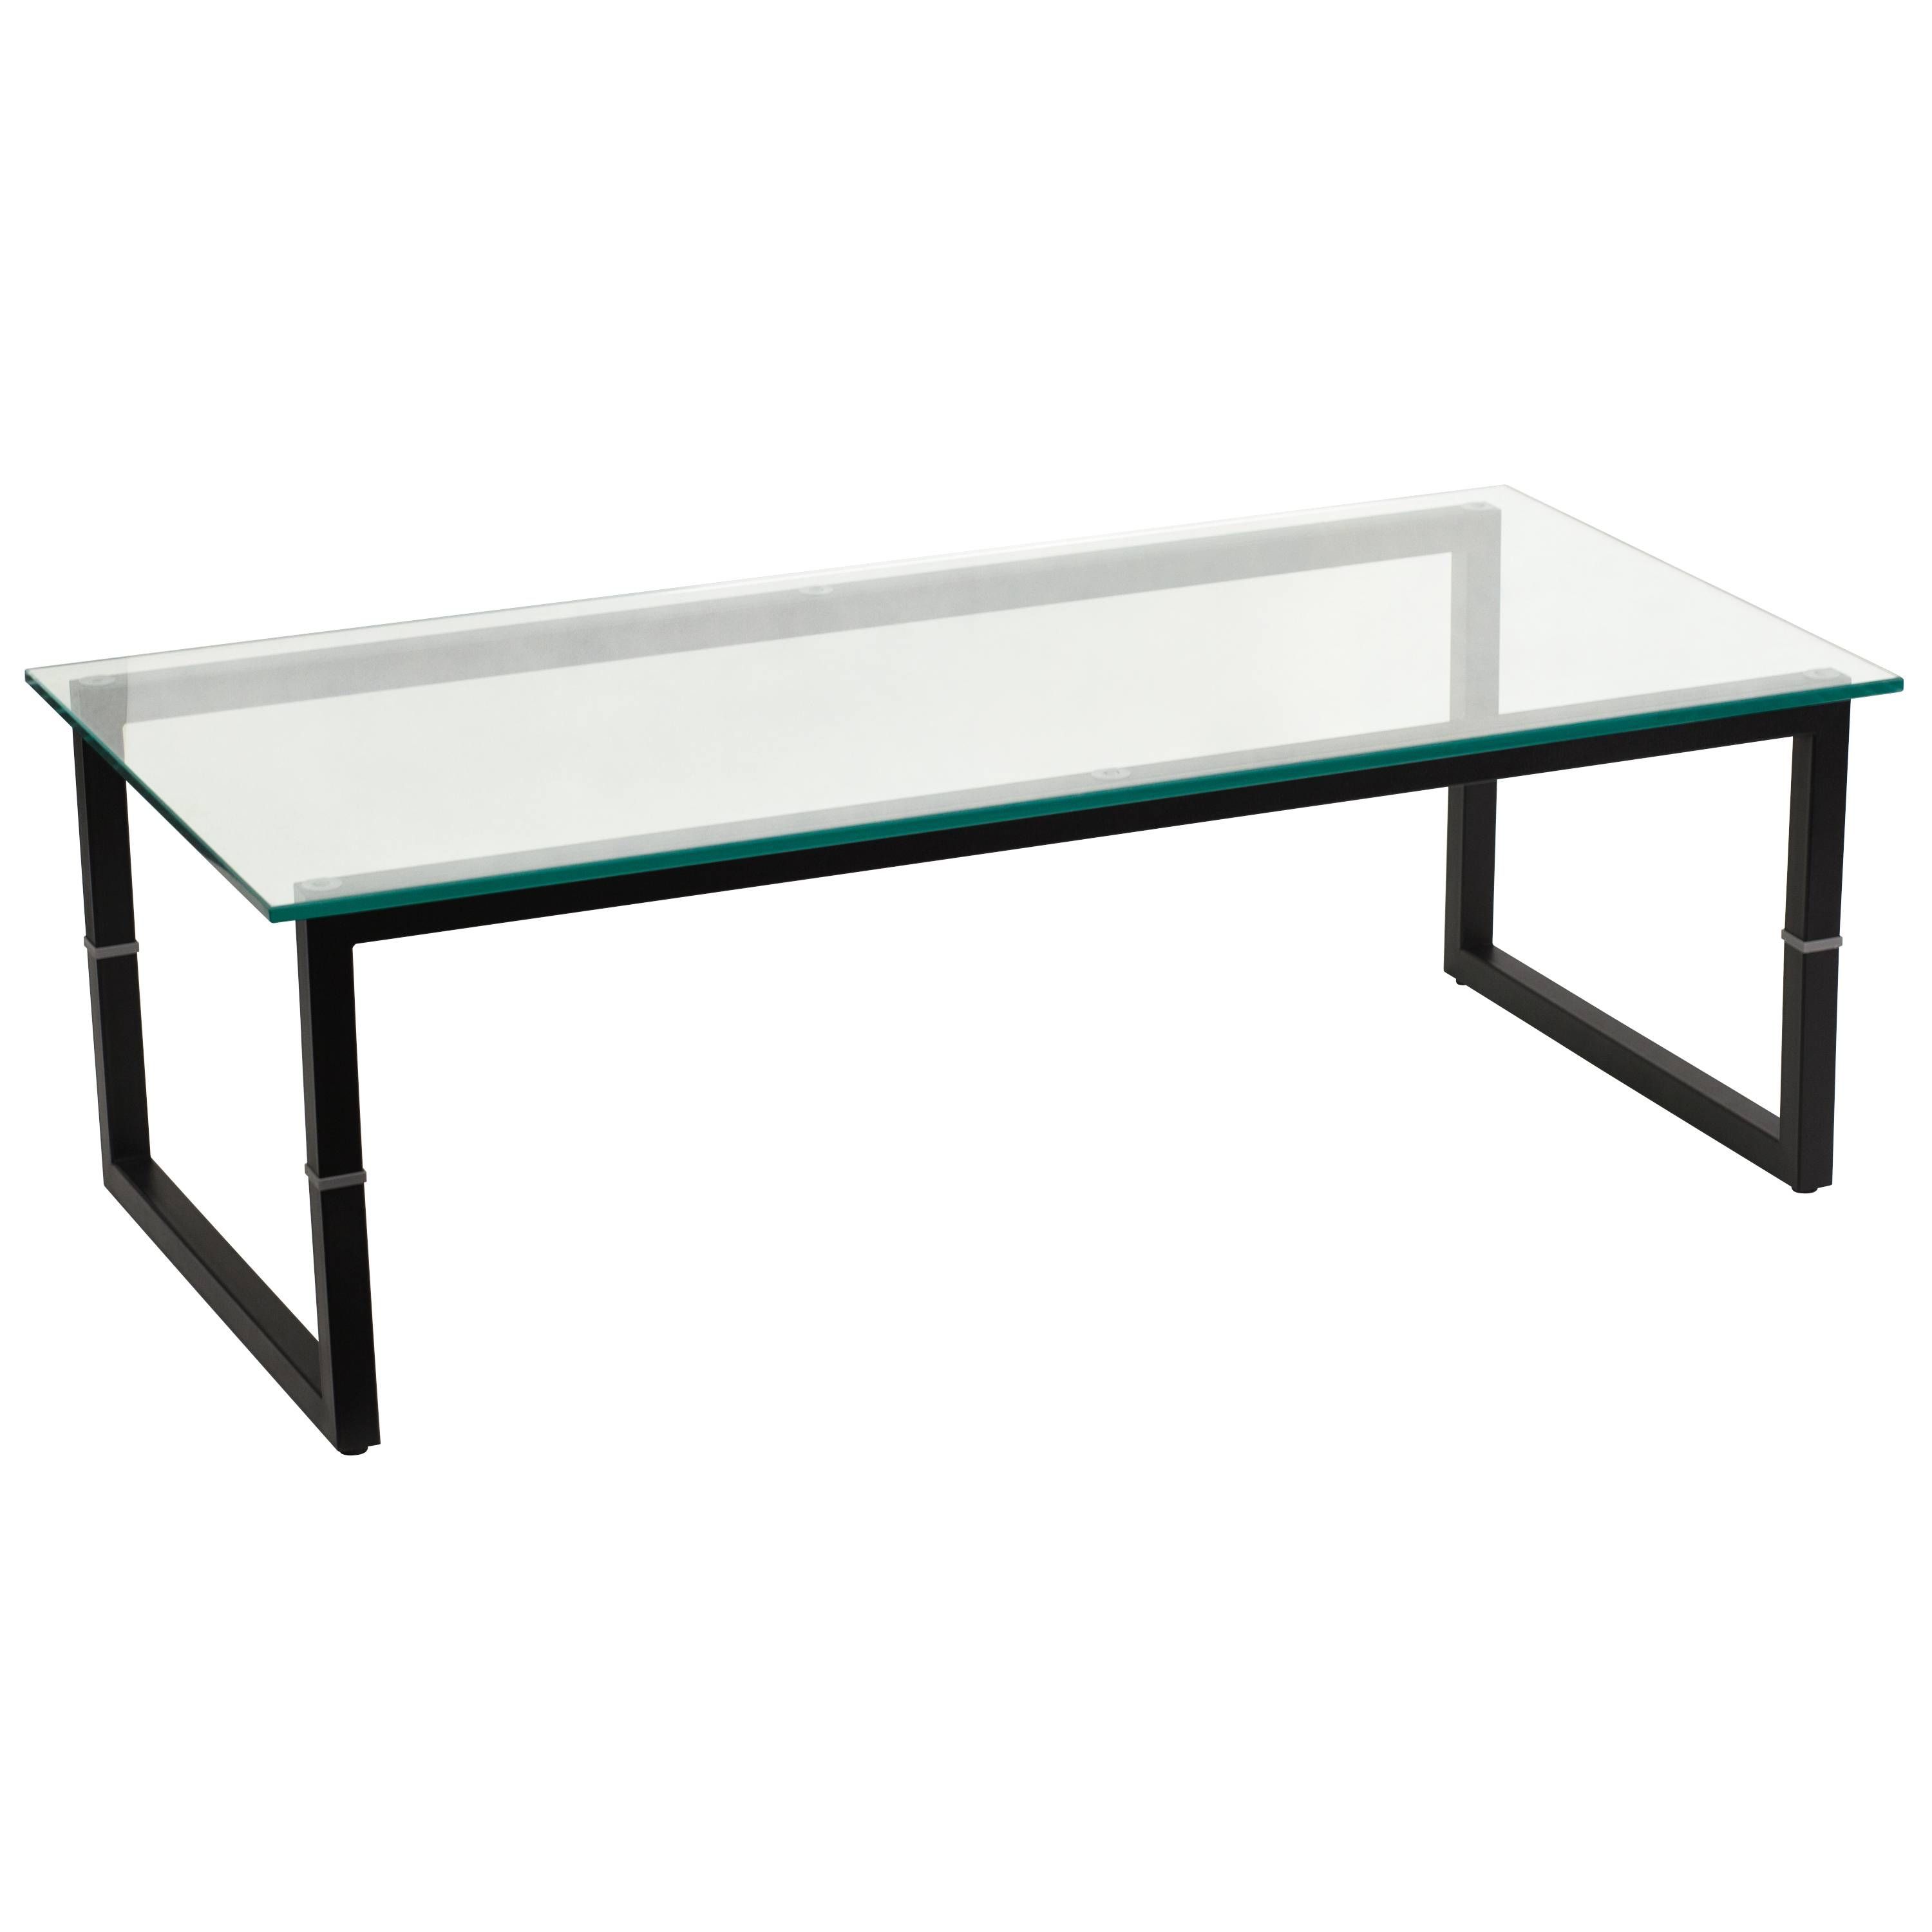 Furniture: Cool Narrow Coffee Table For Awesome Living Room Ideas Throughout Cheap Coffee Tables (View 18 of 30)